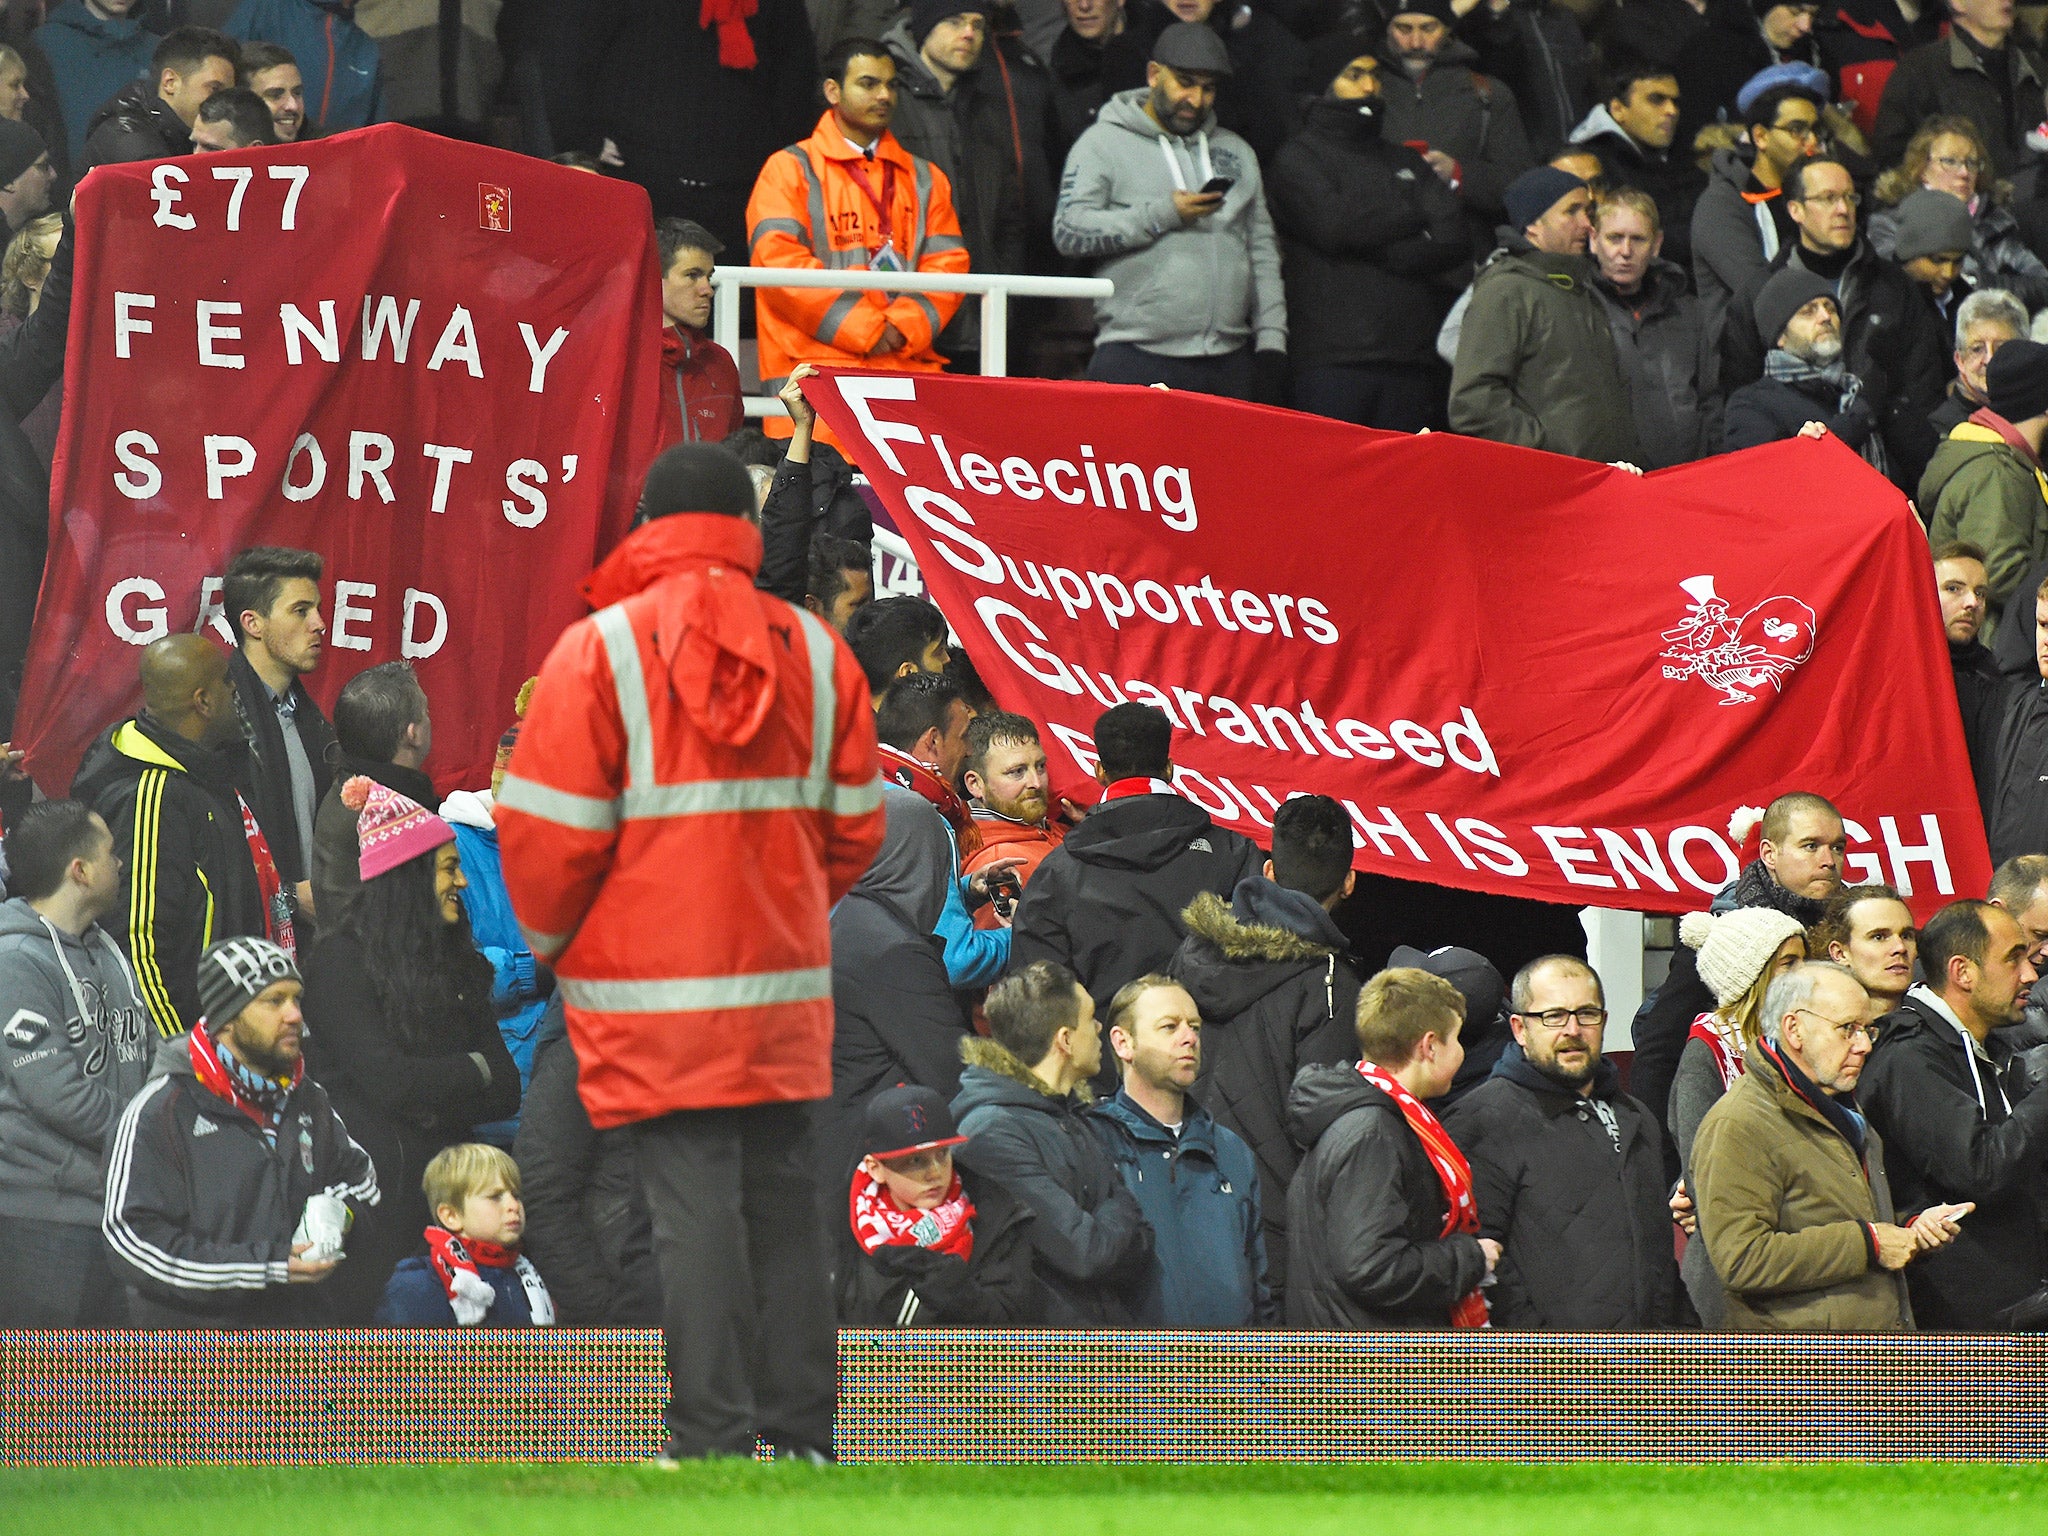 Liverpool fans protesting against their owners, the Fenway Sports Group, last weekend